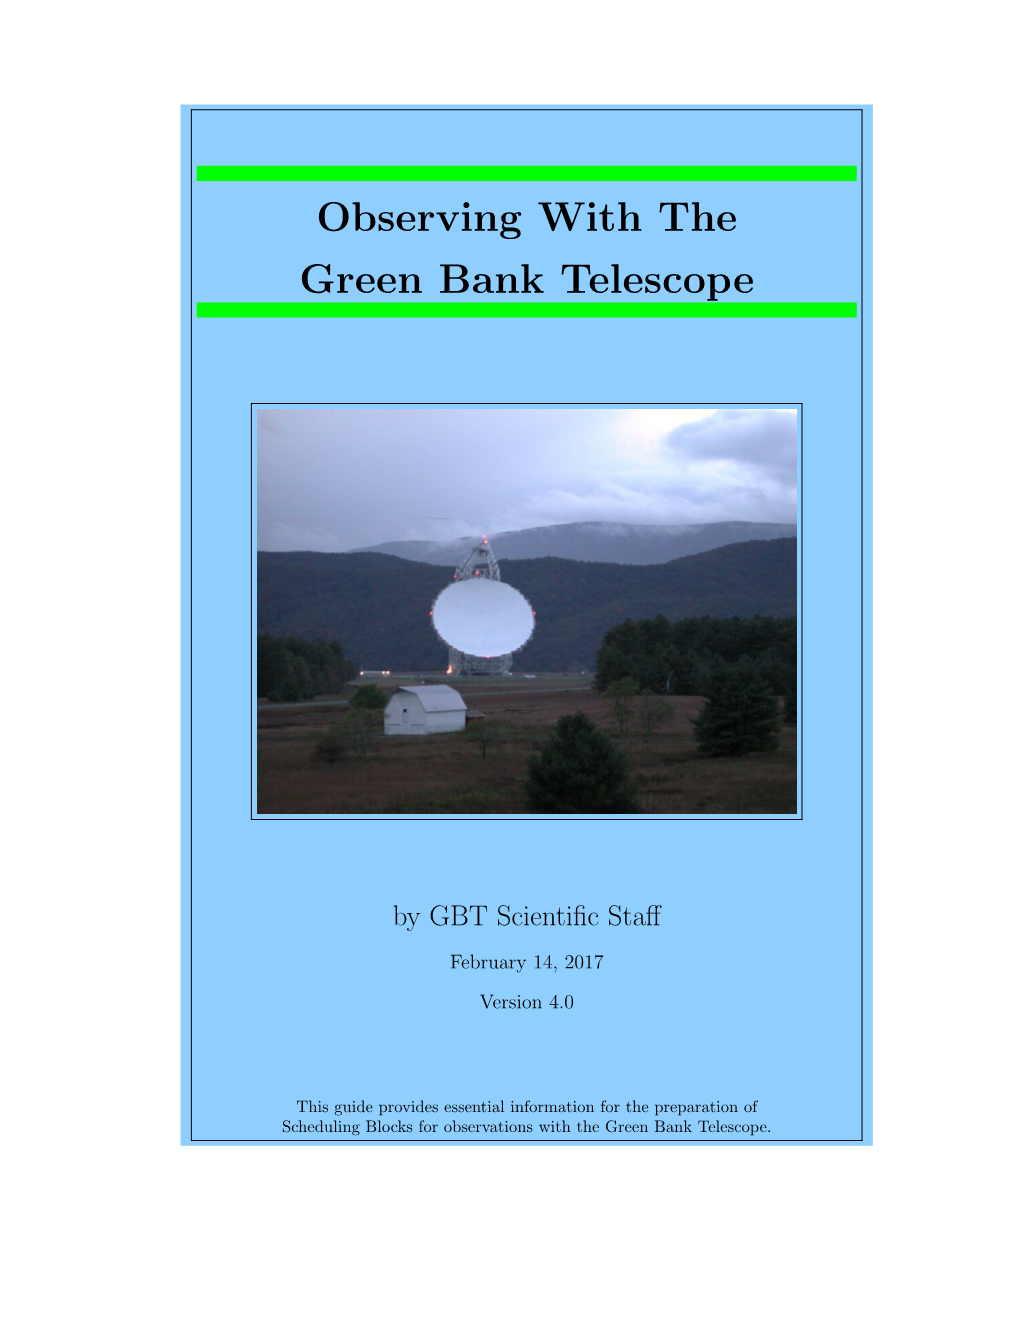 Observing with the Green Bank Telescope